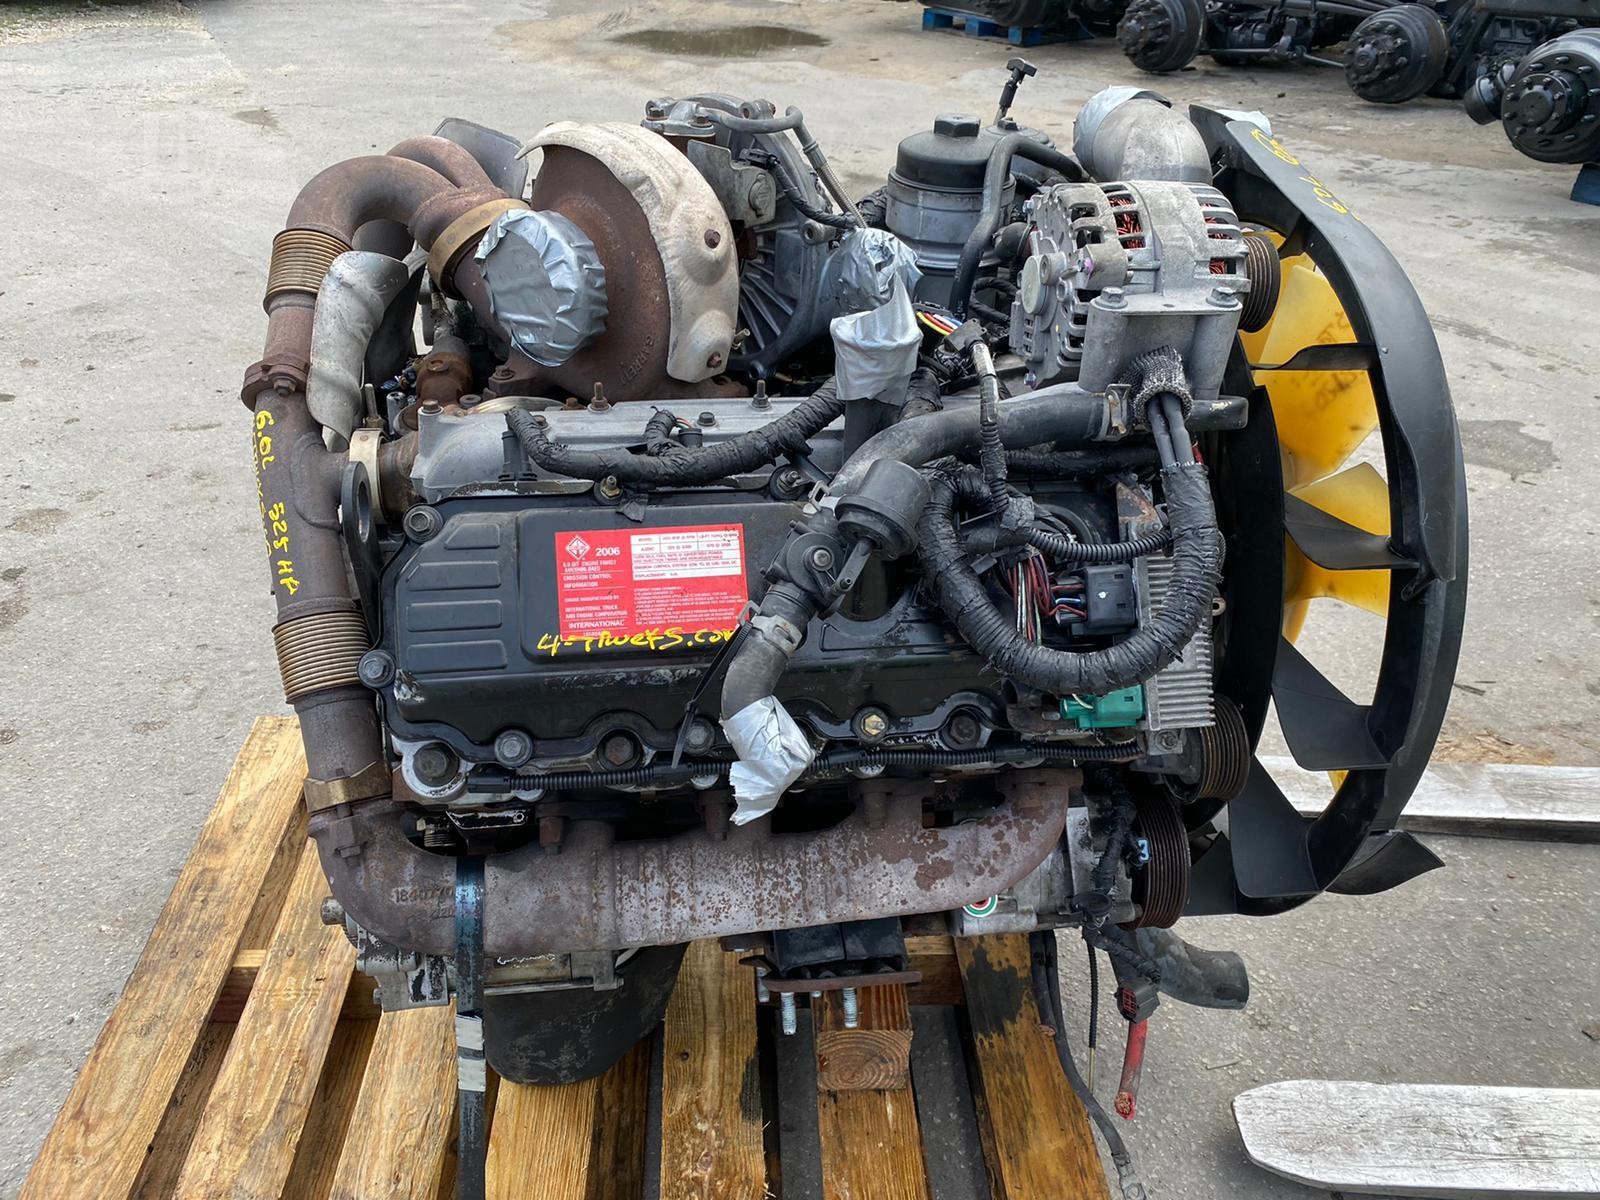 2006 INTERNATIONAL 6.0 Engine For Sale In Miami, Florida | TruckPaper.com